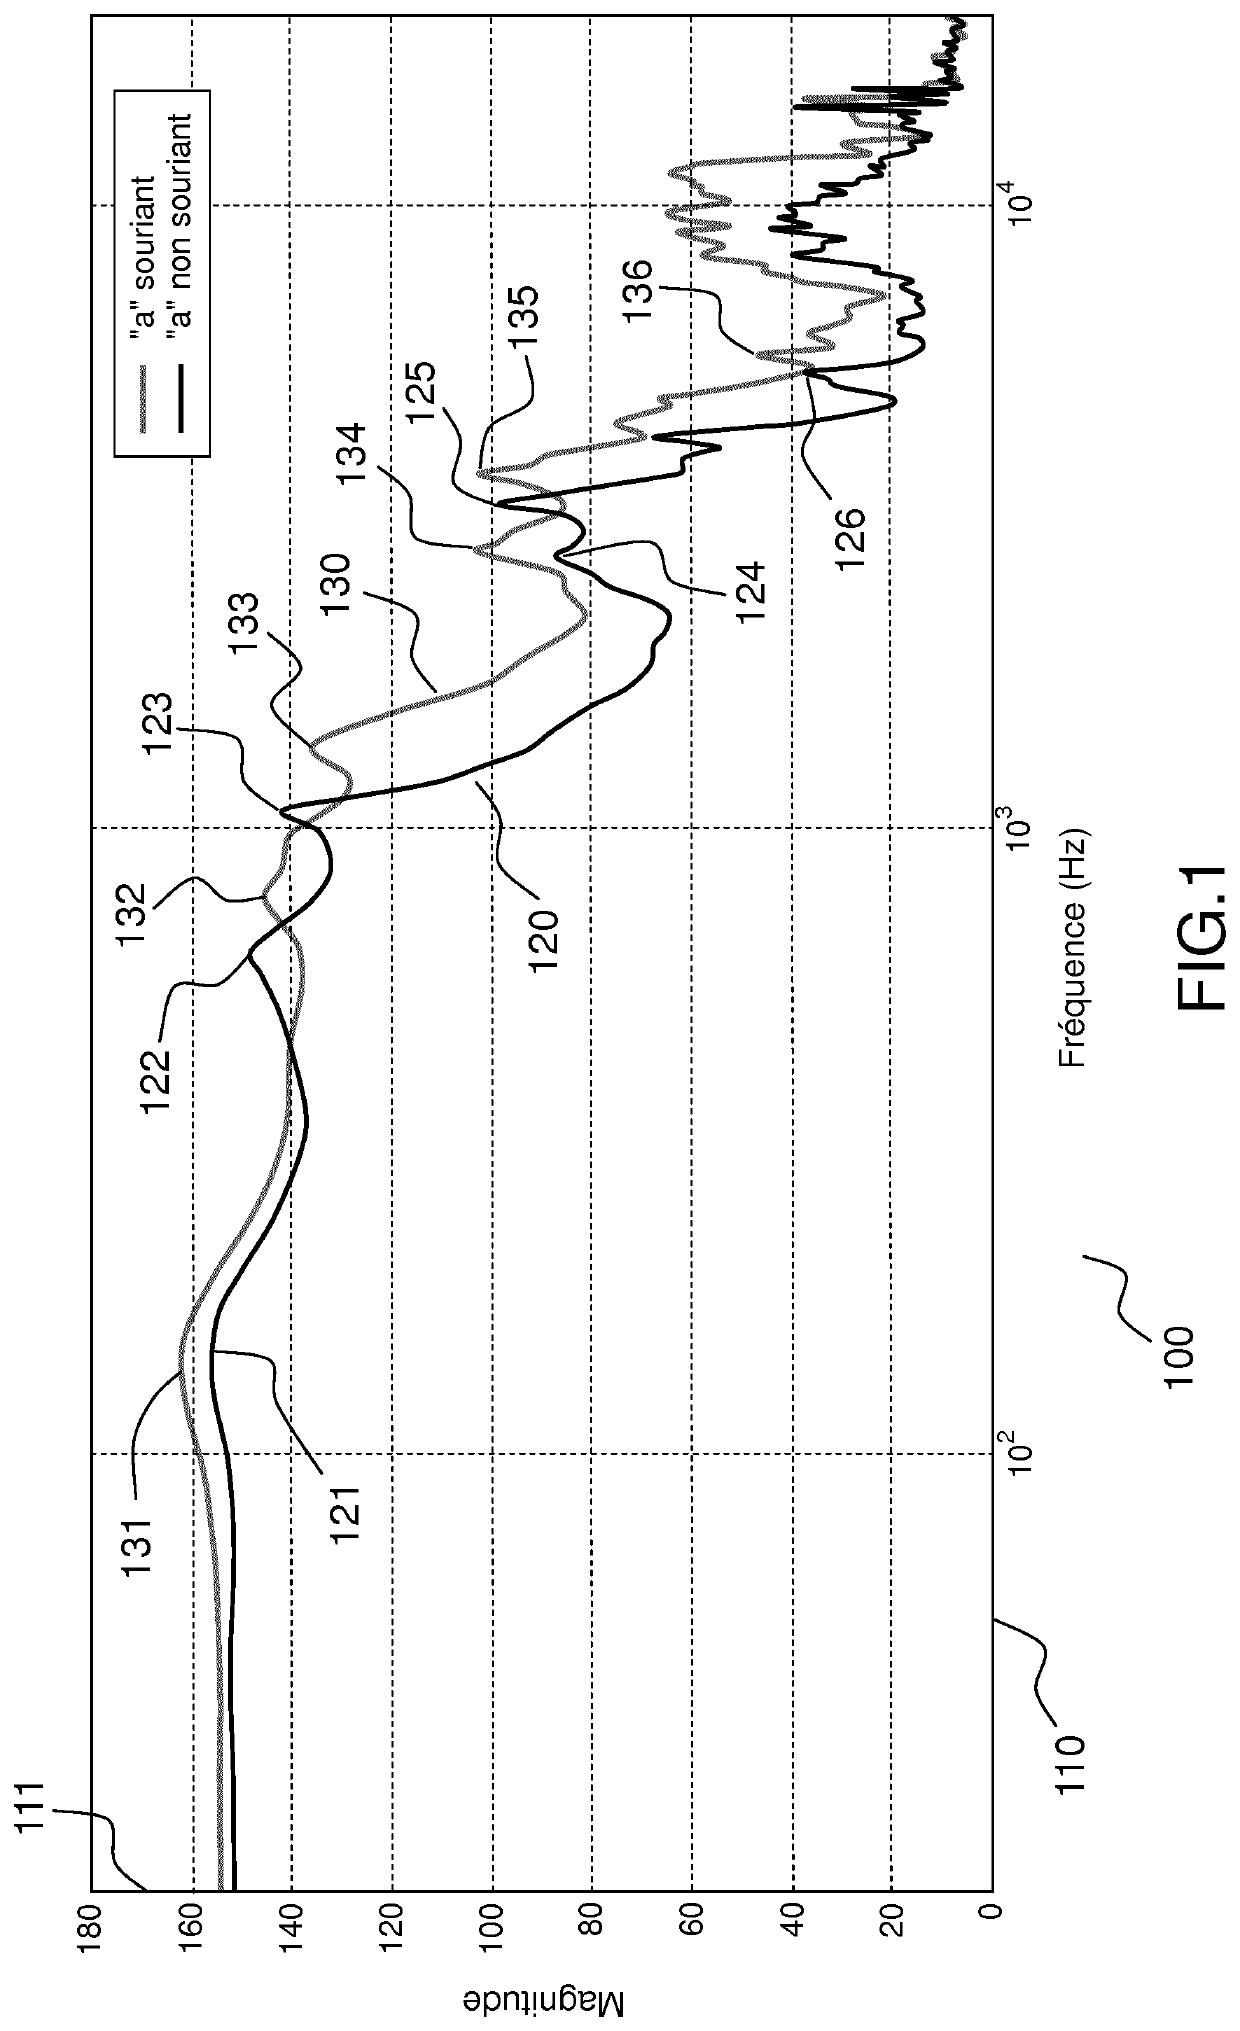 Method and apparatus for dynamic modifying of the timbre of the voice by frequency shift of the formants of a spectral envelope